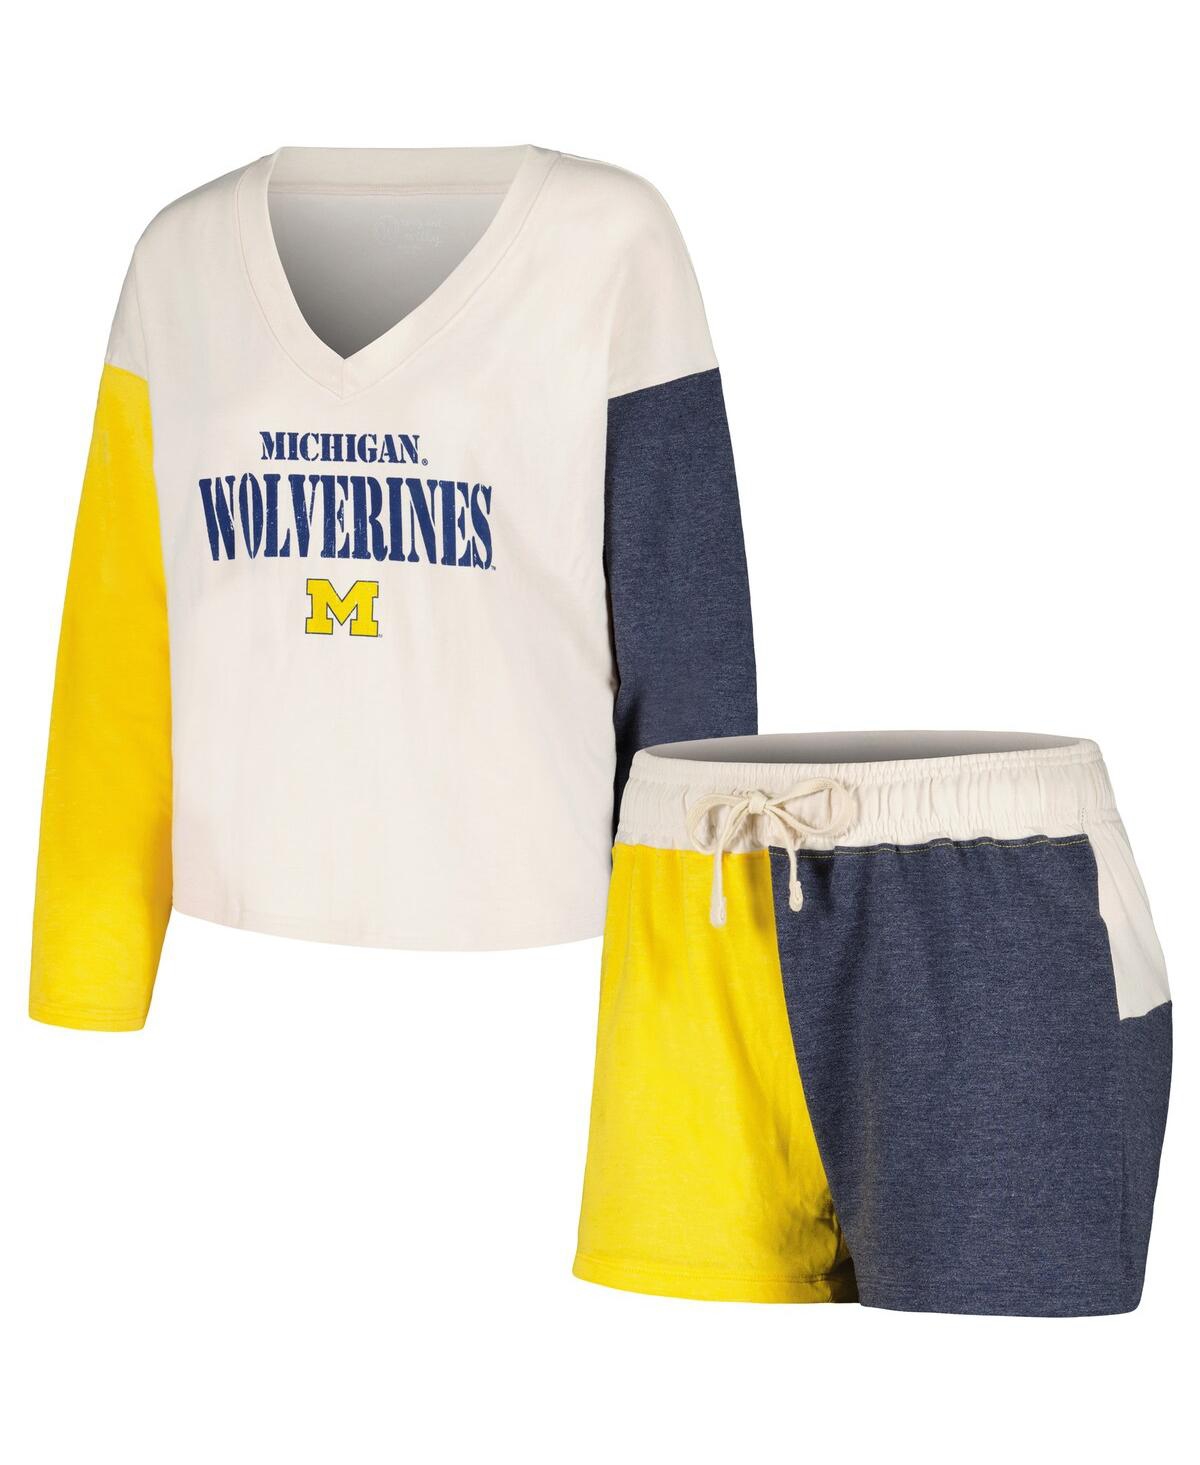 Women's Wes & Willy Cream Distressed Michigan Wolverines Colorblock Tri-Blend Long Sleeve V-Neck T-shirt and Shorts Sleep Set - Cream